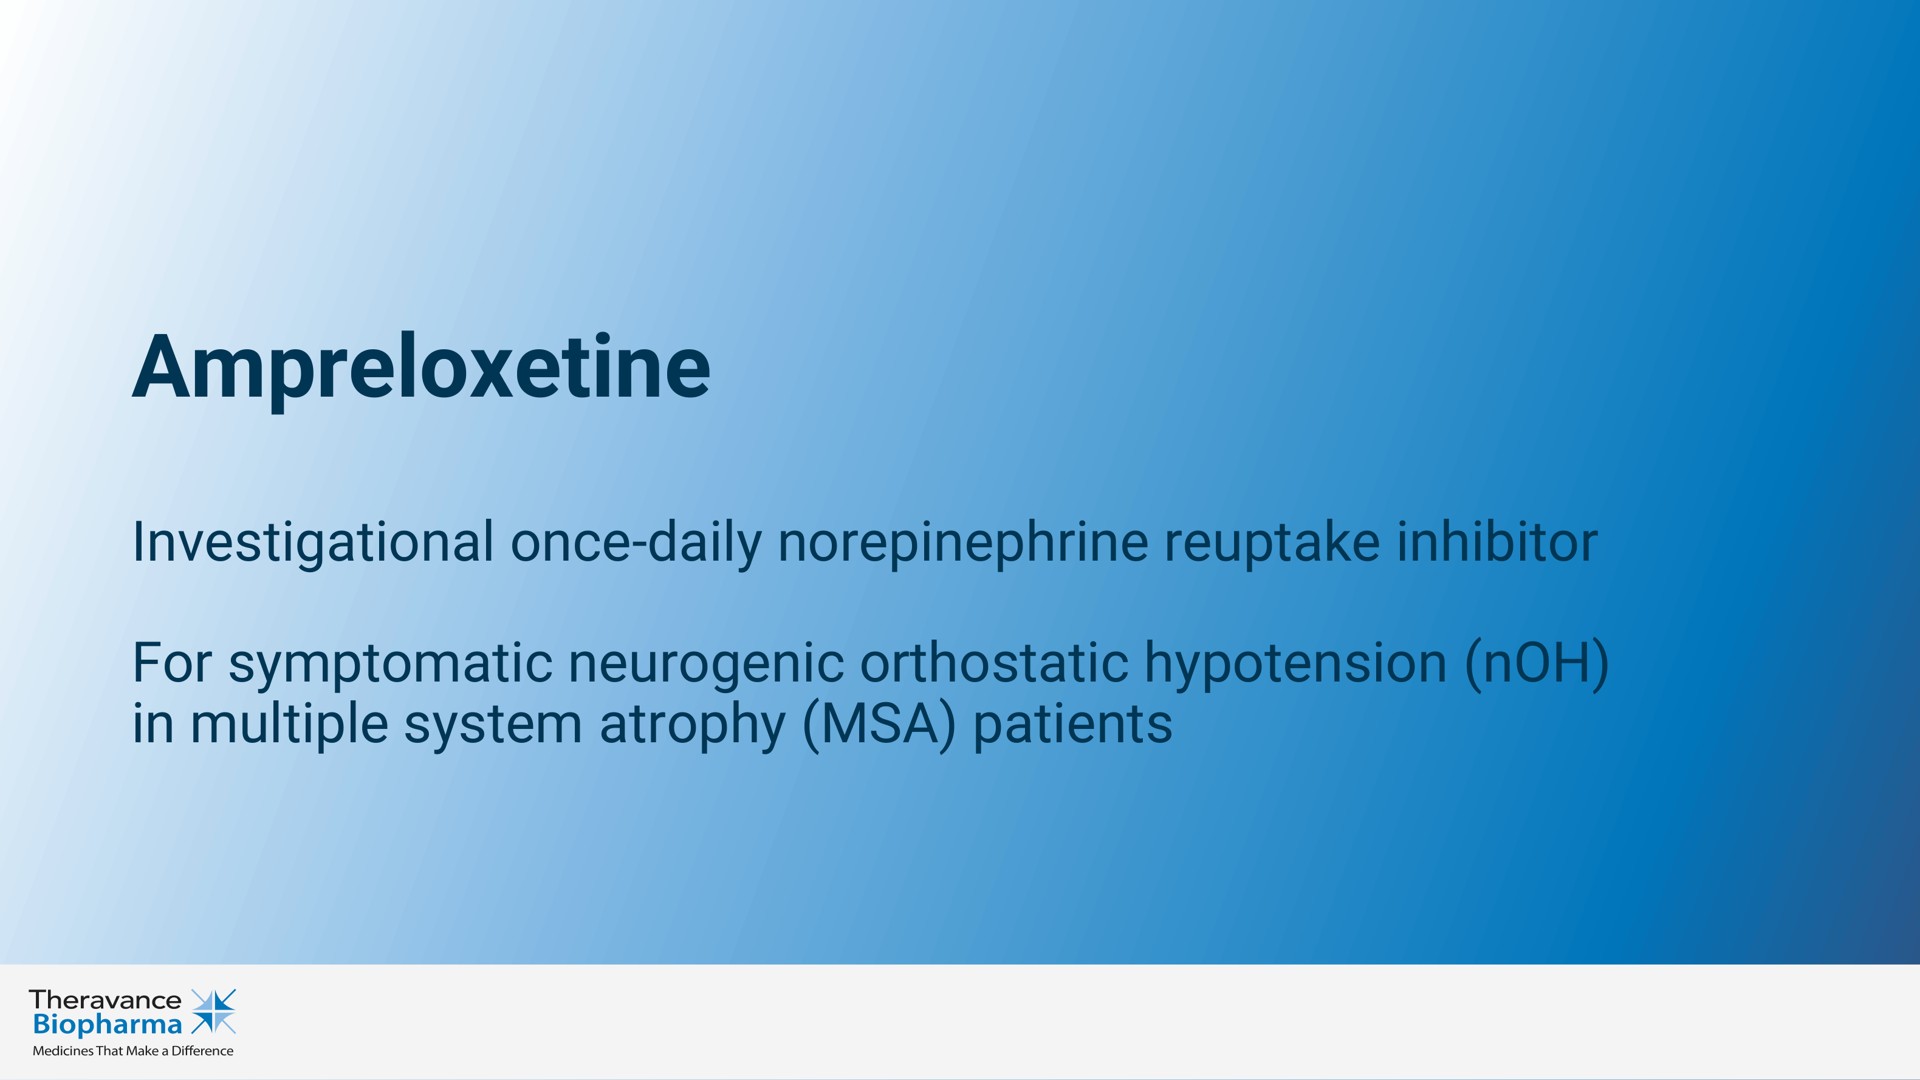 investigational once daily for symptomatic neurogenic in multiple system atrophy | Theravance Biopharma